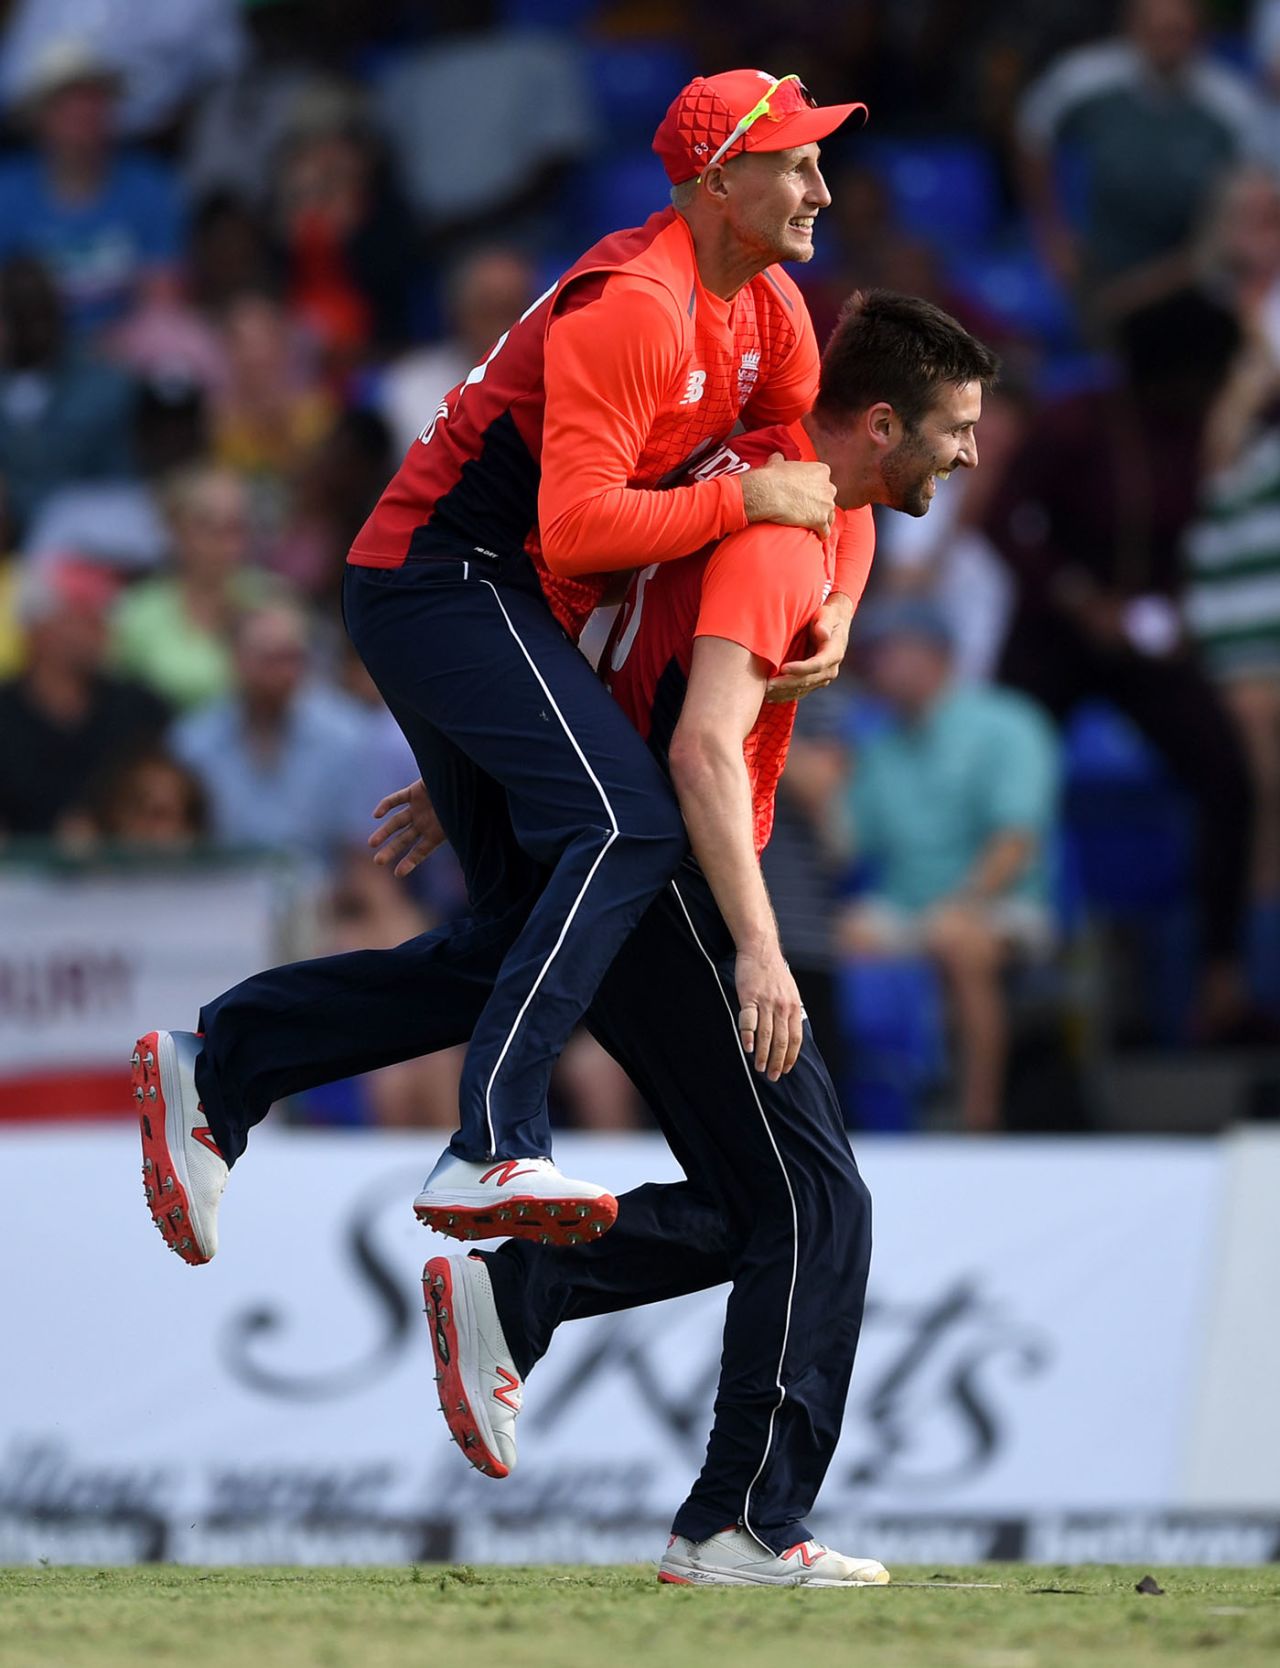 Mark Wood celebrates with Joe Root after dismissing Nicholas Pooran, West Indies v England, 3rd T20I, St Kitts, March 10, 2019